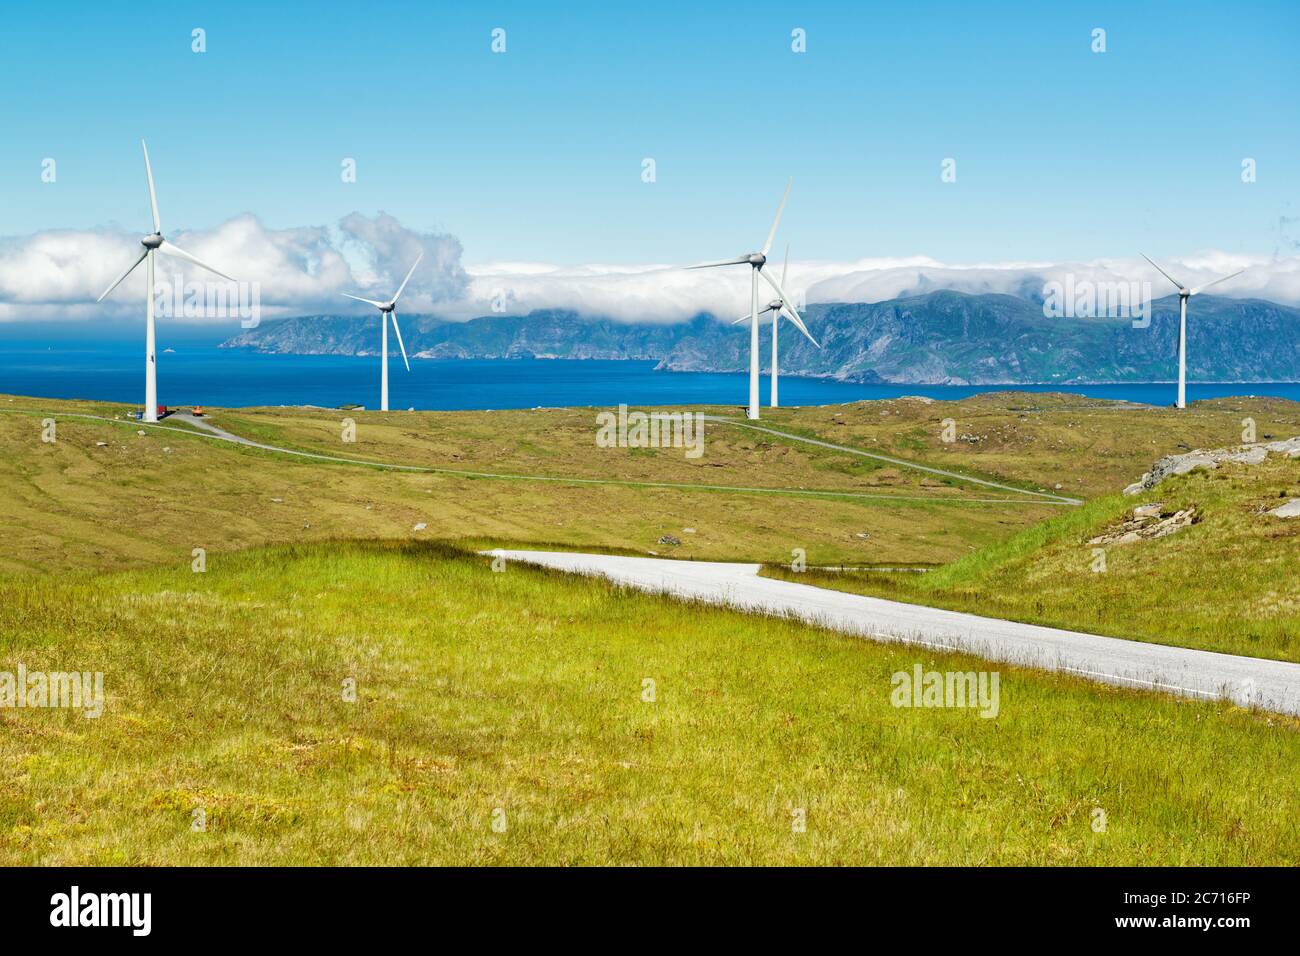 Windmills near the sea producing clean energy at Maloy island, Norway Stock Photo